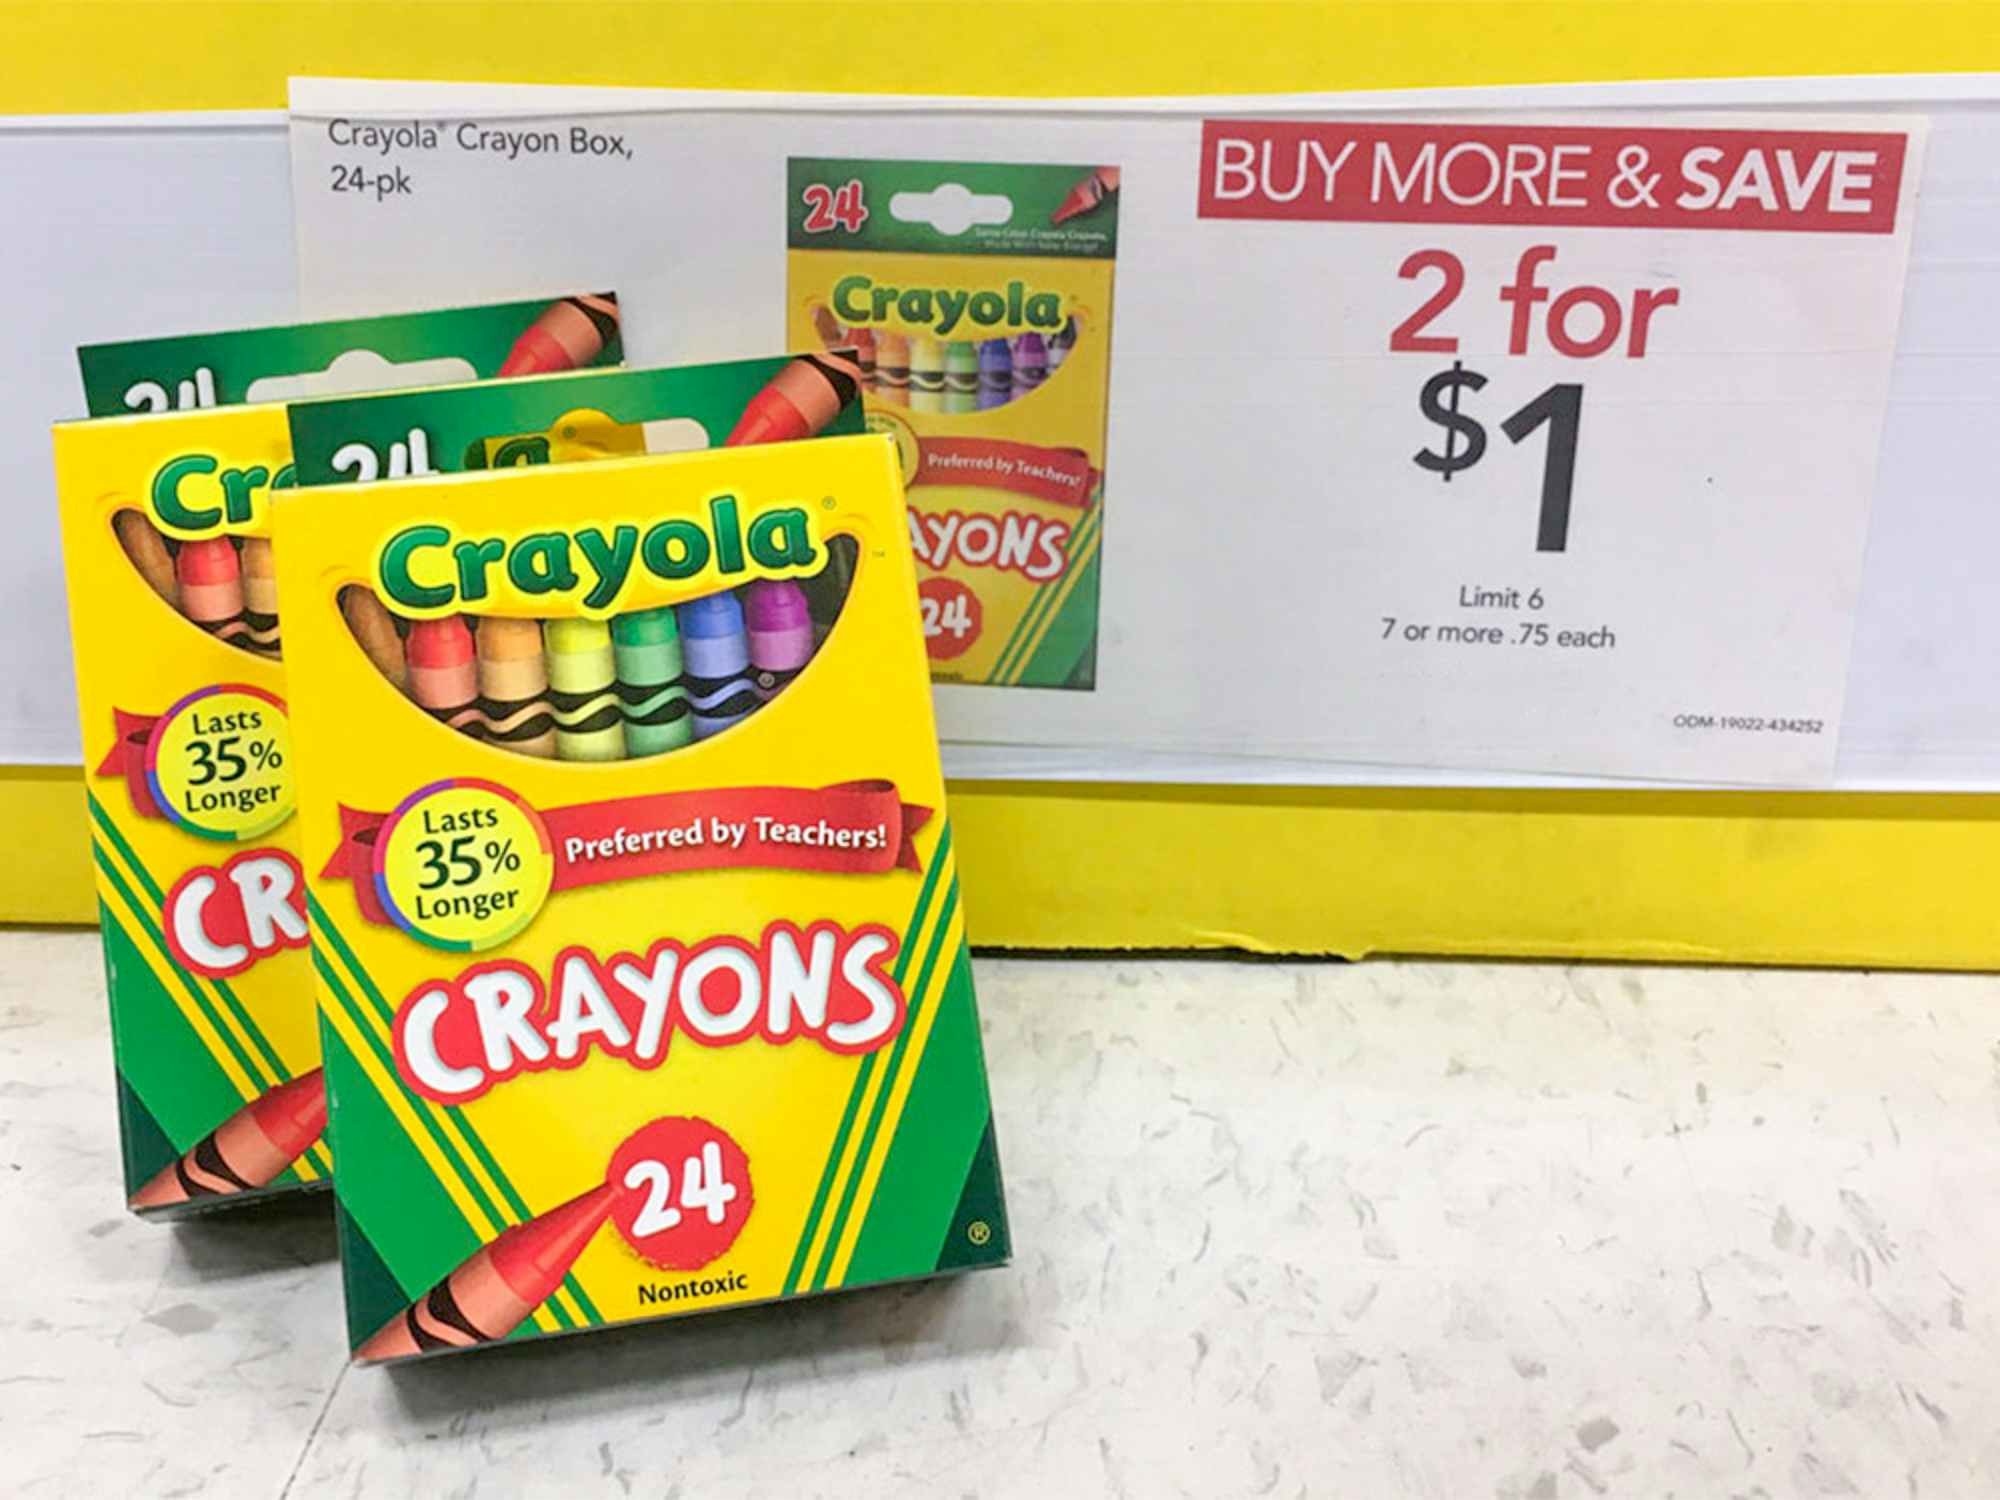 Boxes of Crayola crayons next to a sale sign for 2 for $1 at Office Depot